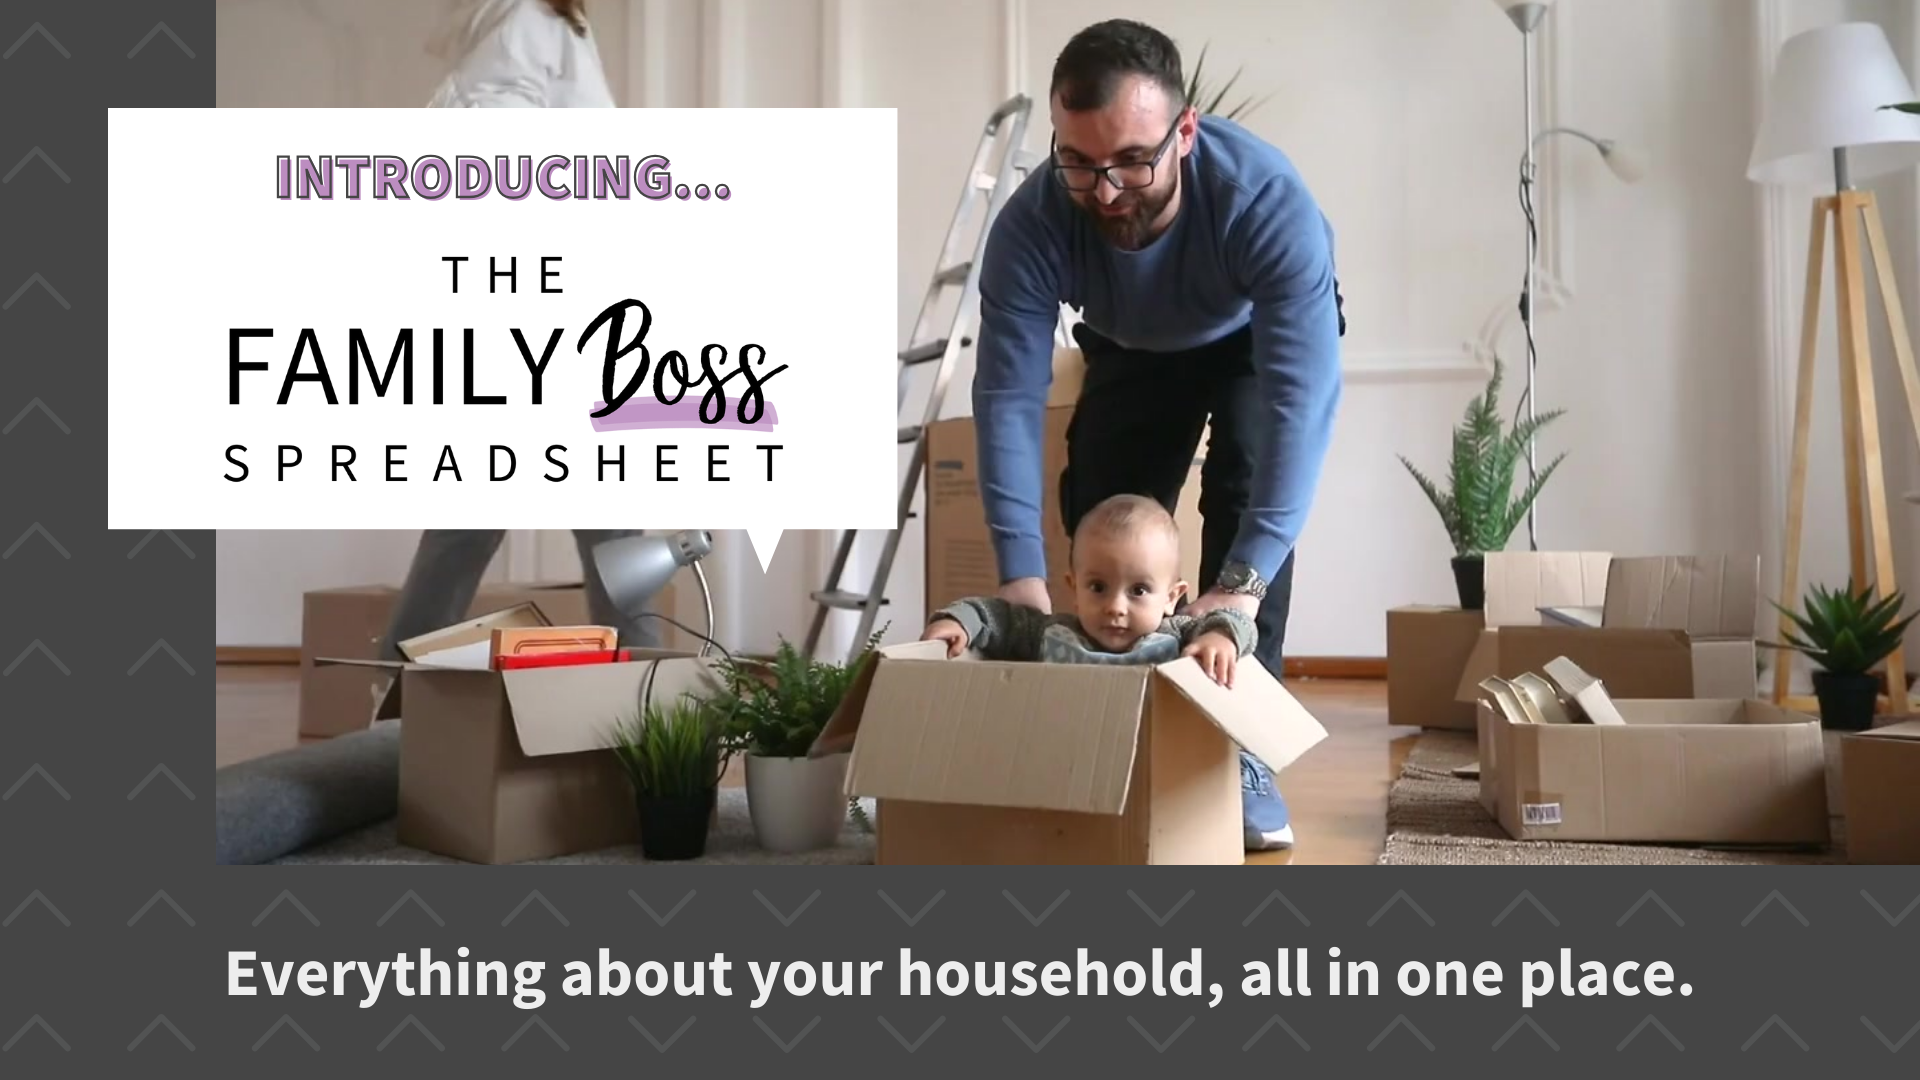 Family Boss Spreadsheet is a home management spreadsheet that helps you manage everything about your life digitally in one place.